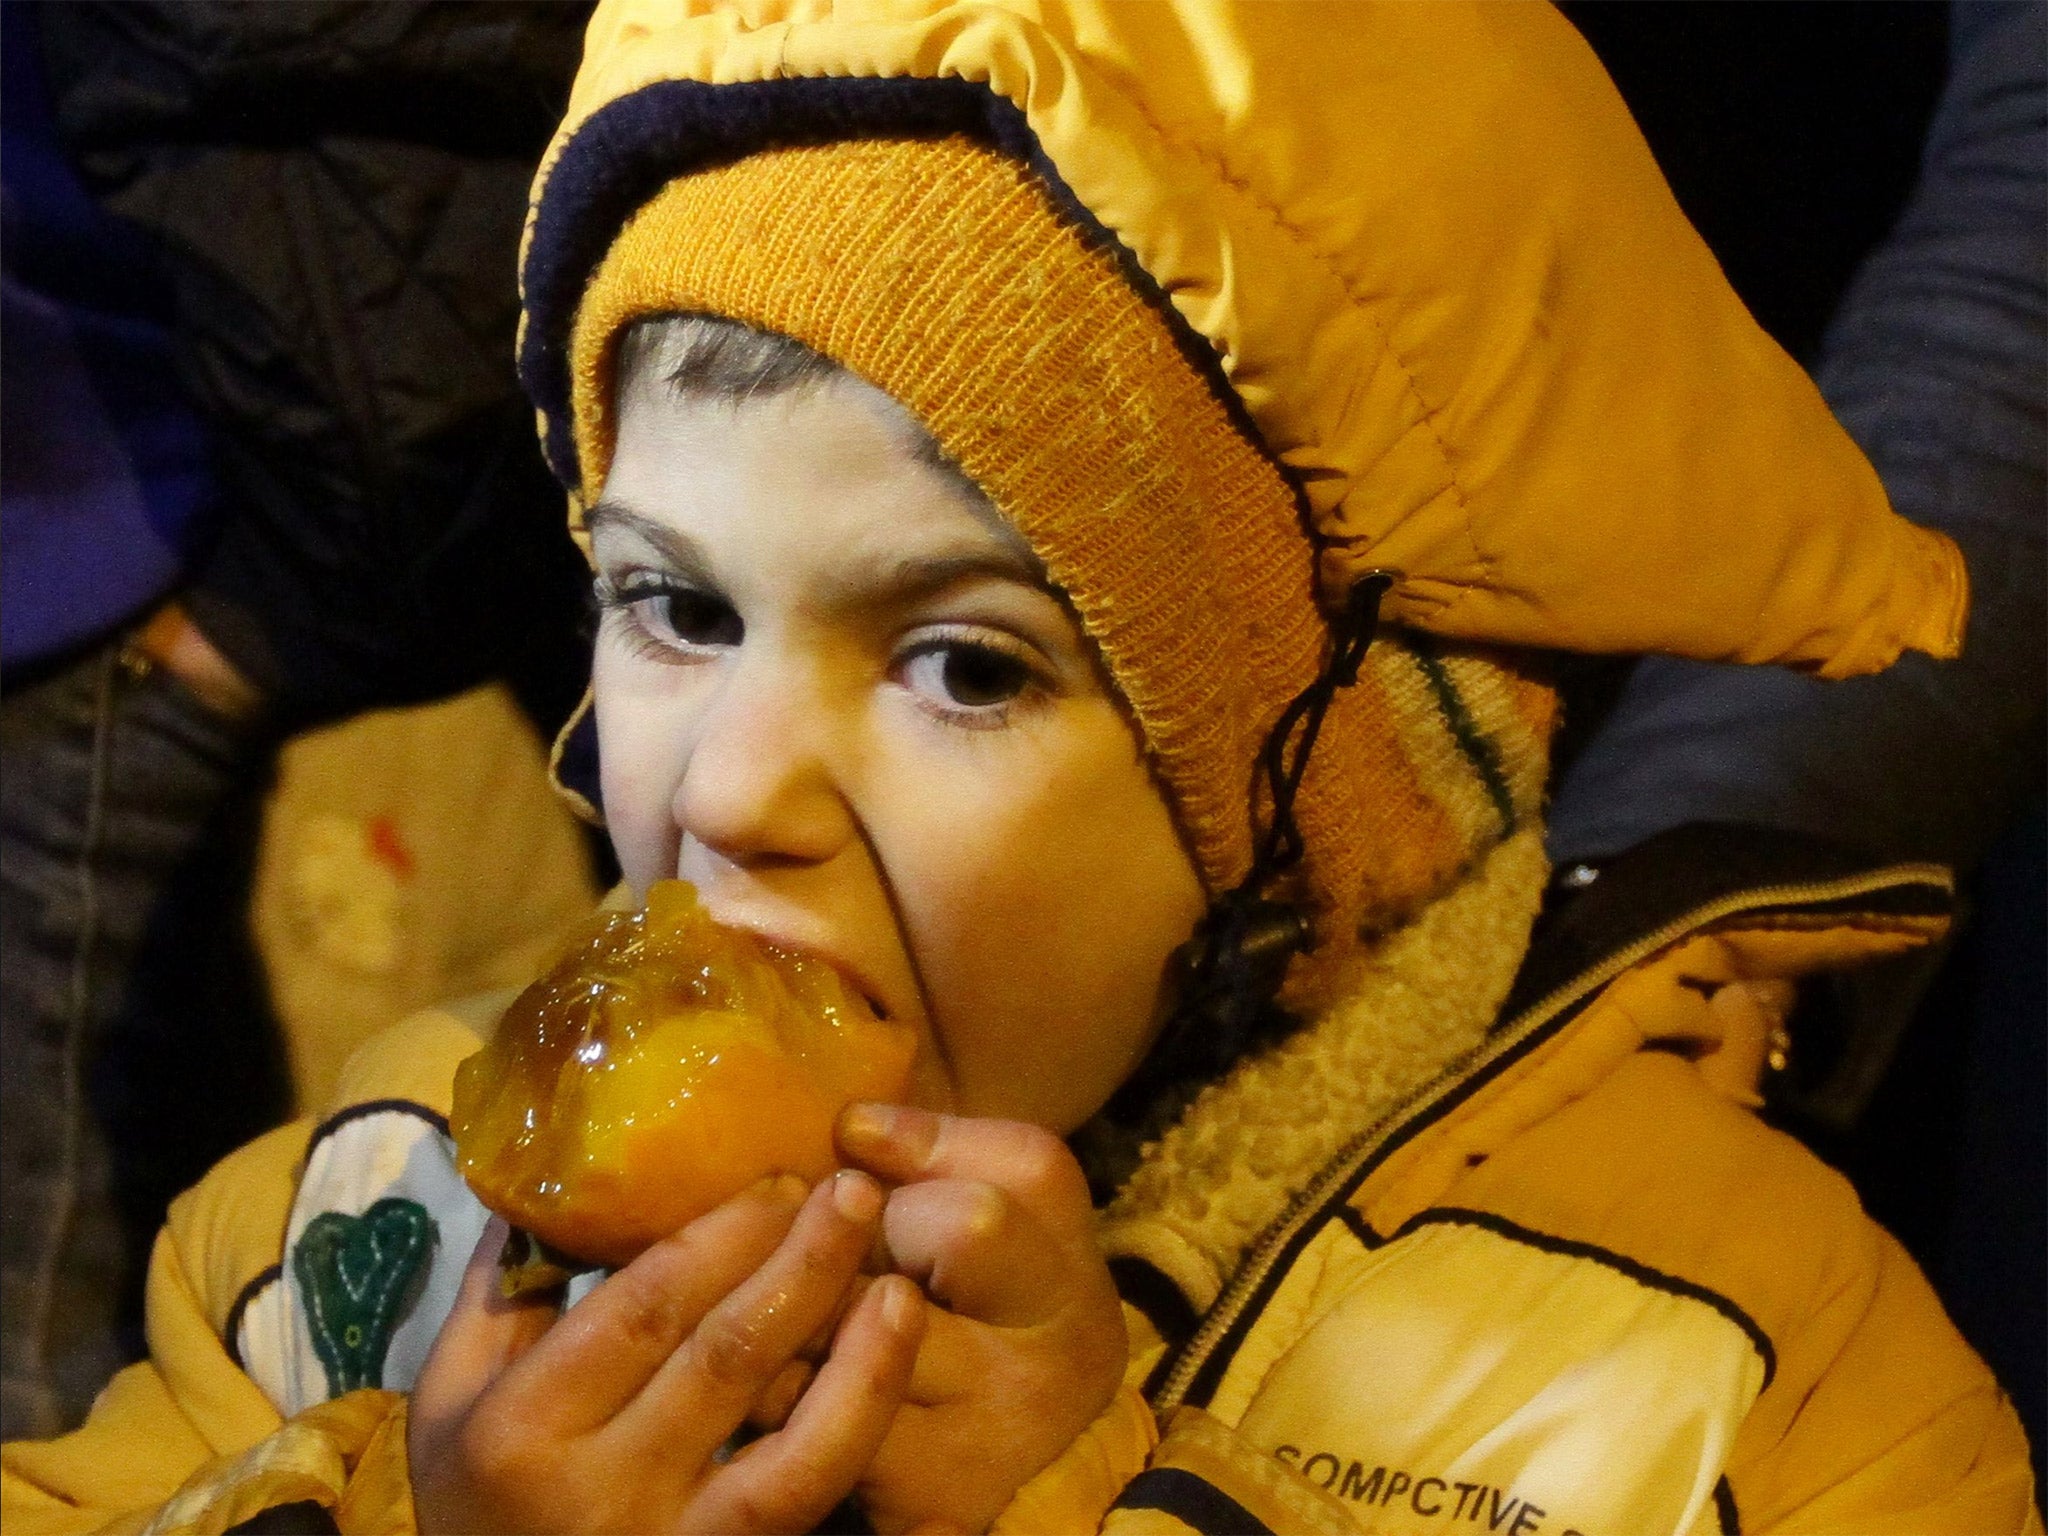 &#13;
A lucky child tucks into some fruit in Madaya &#13;